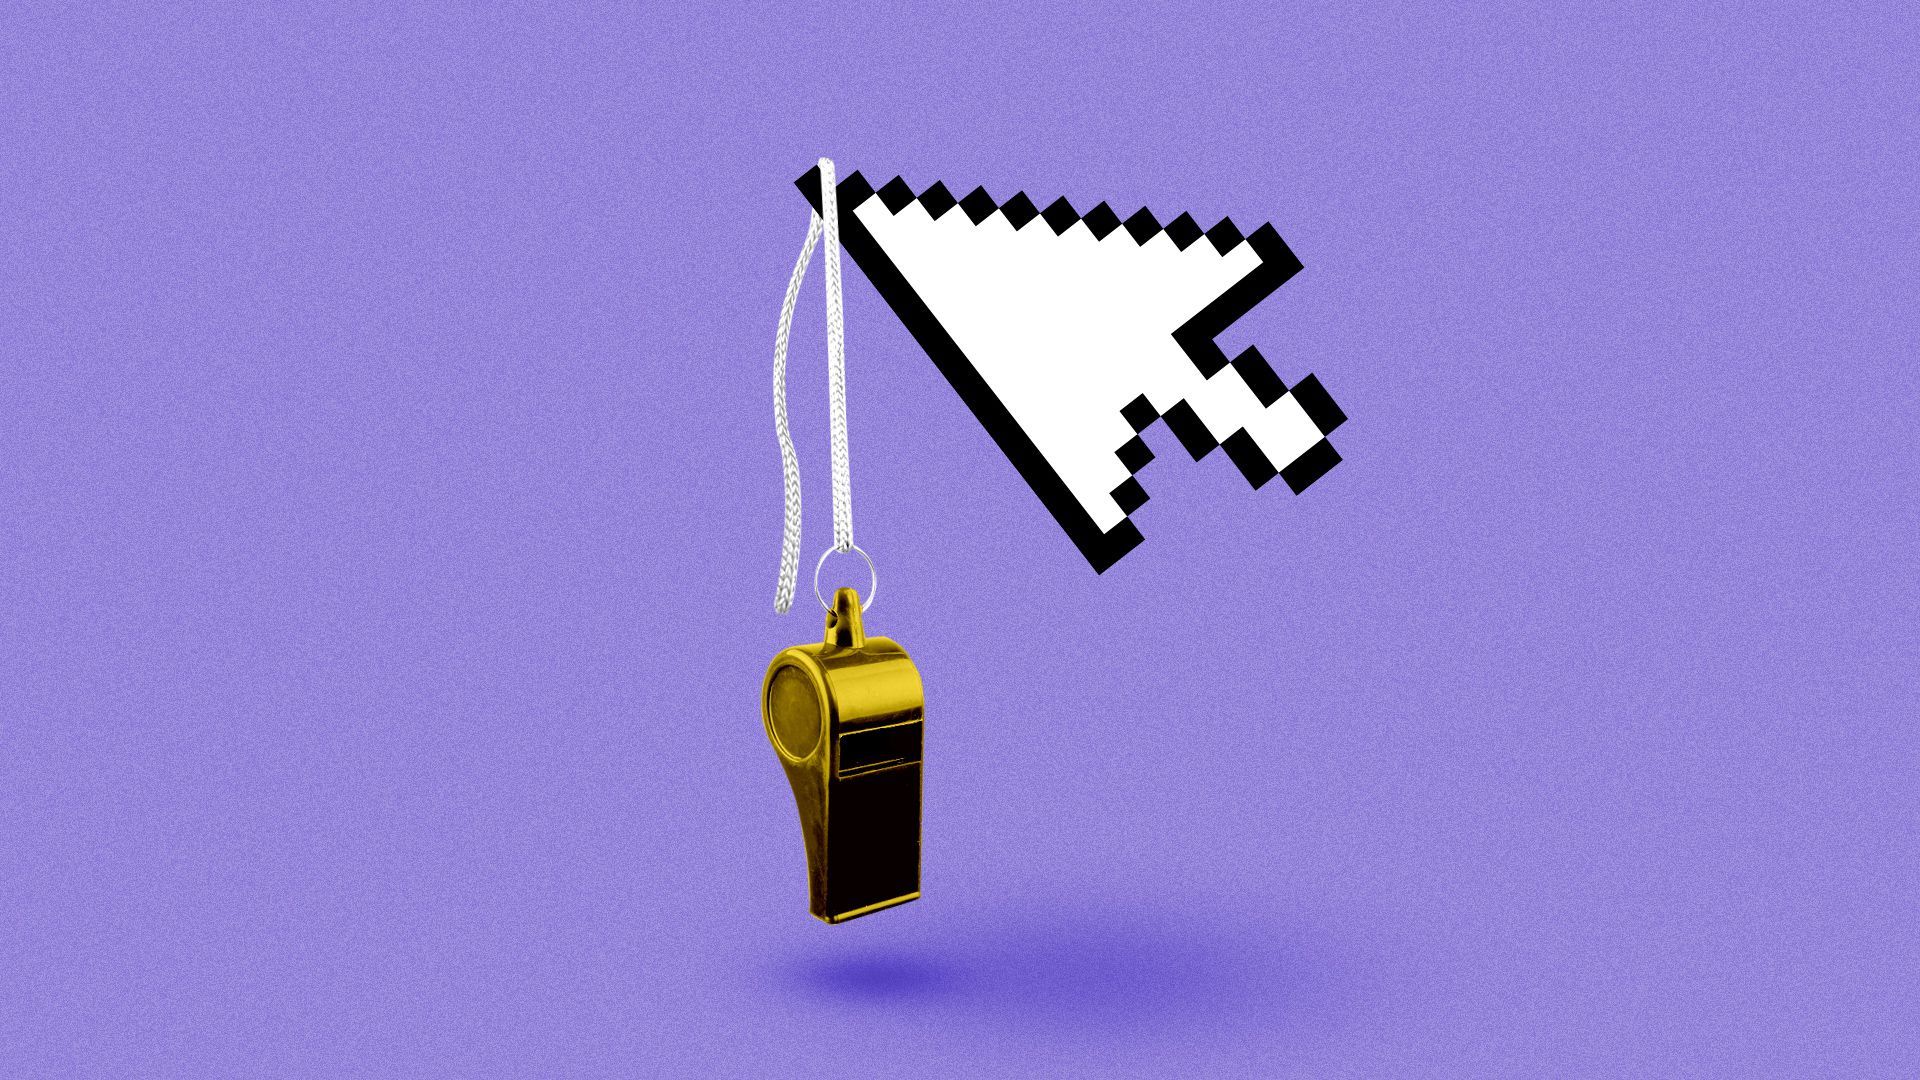 Illustration of a giant cursor holding a whistle